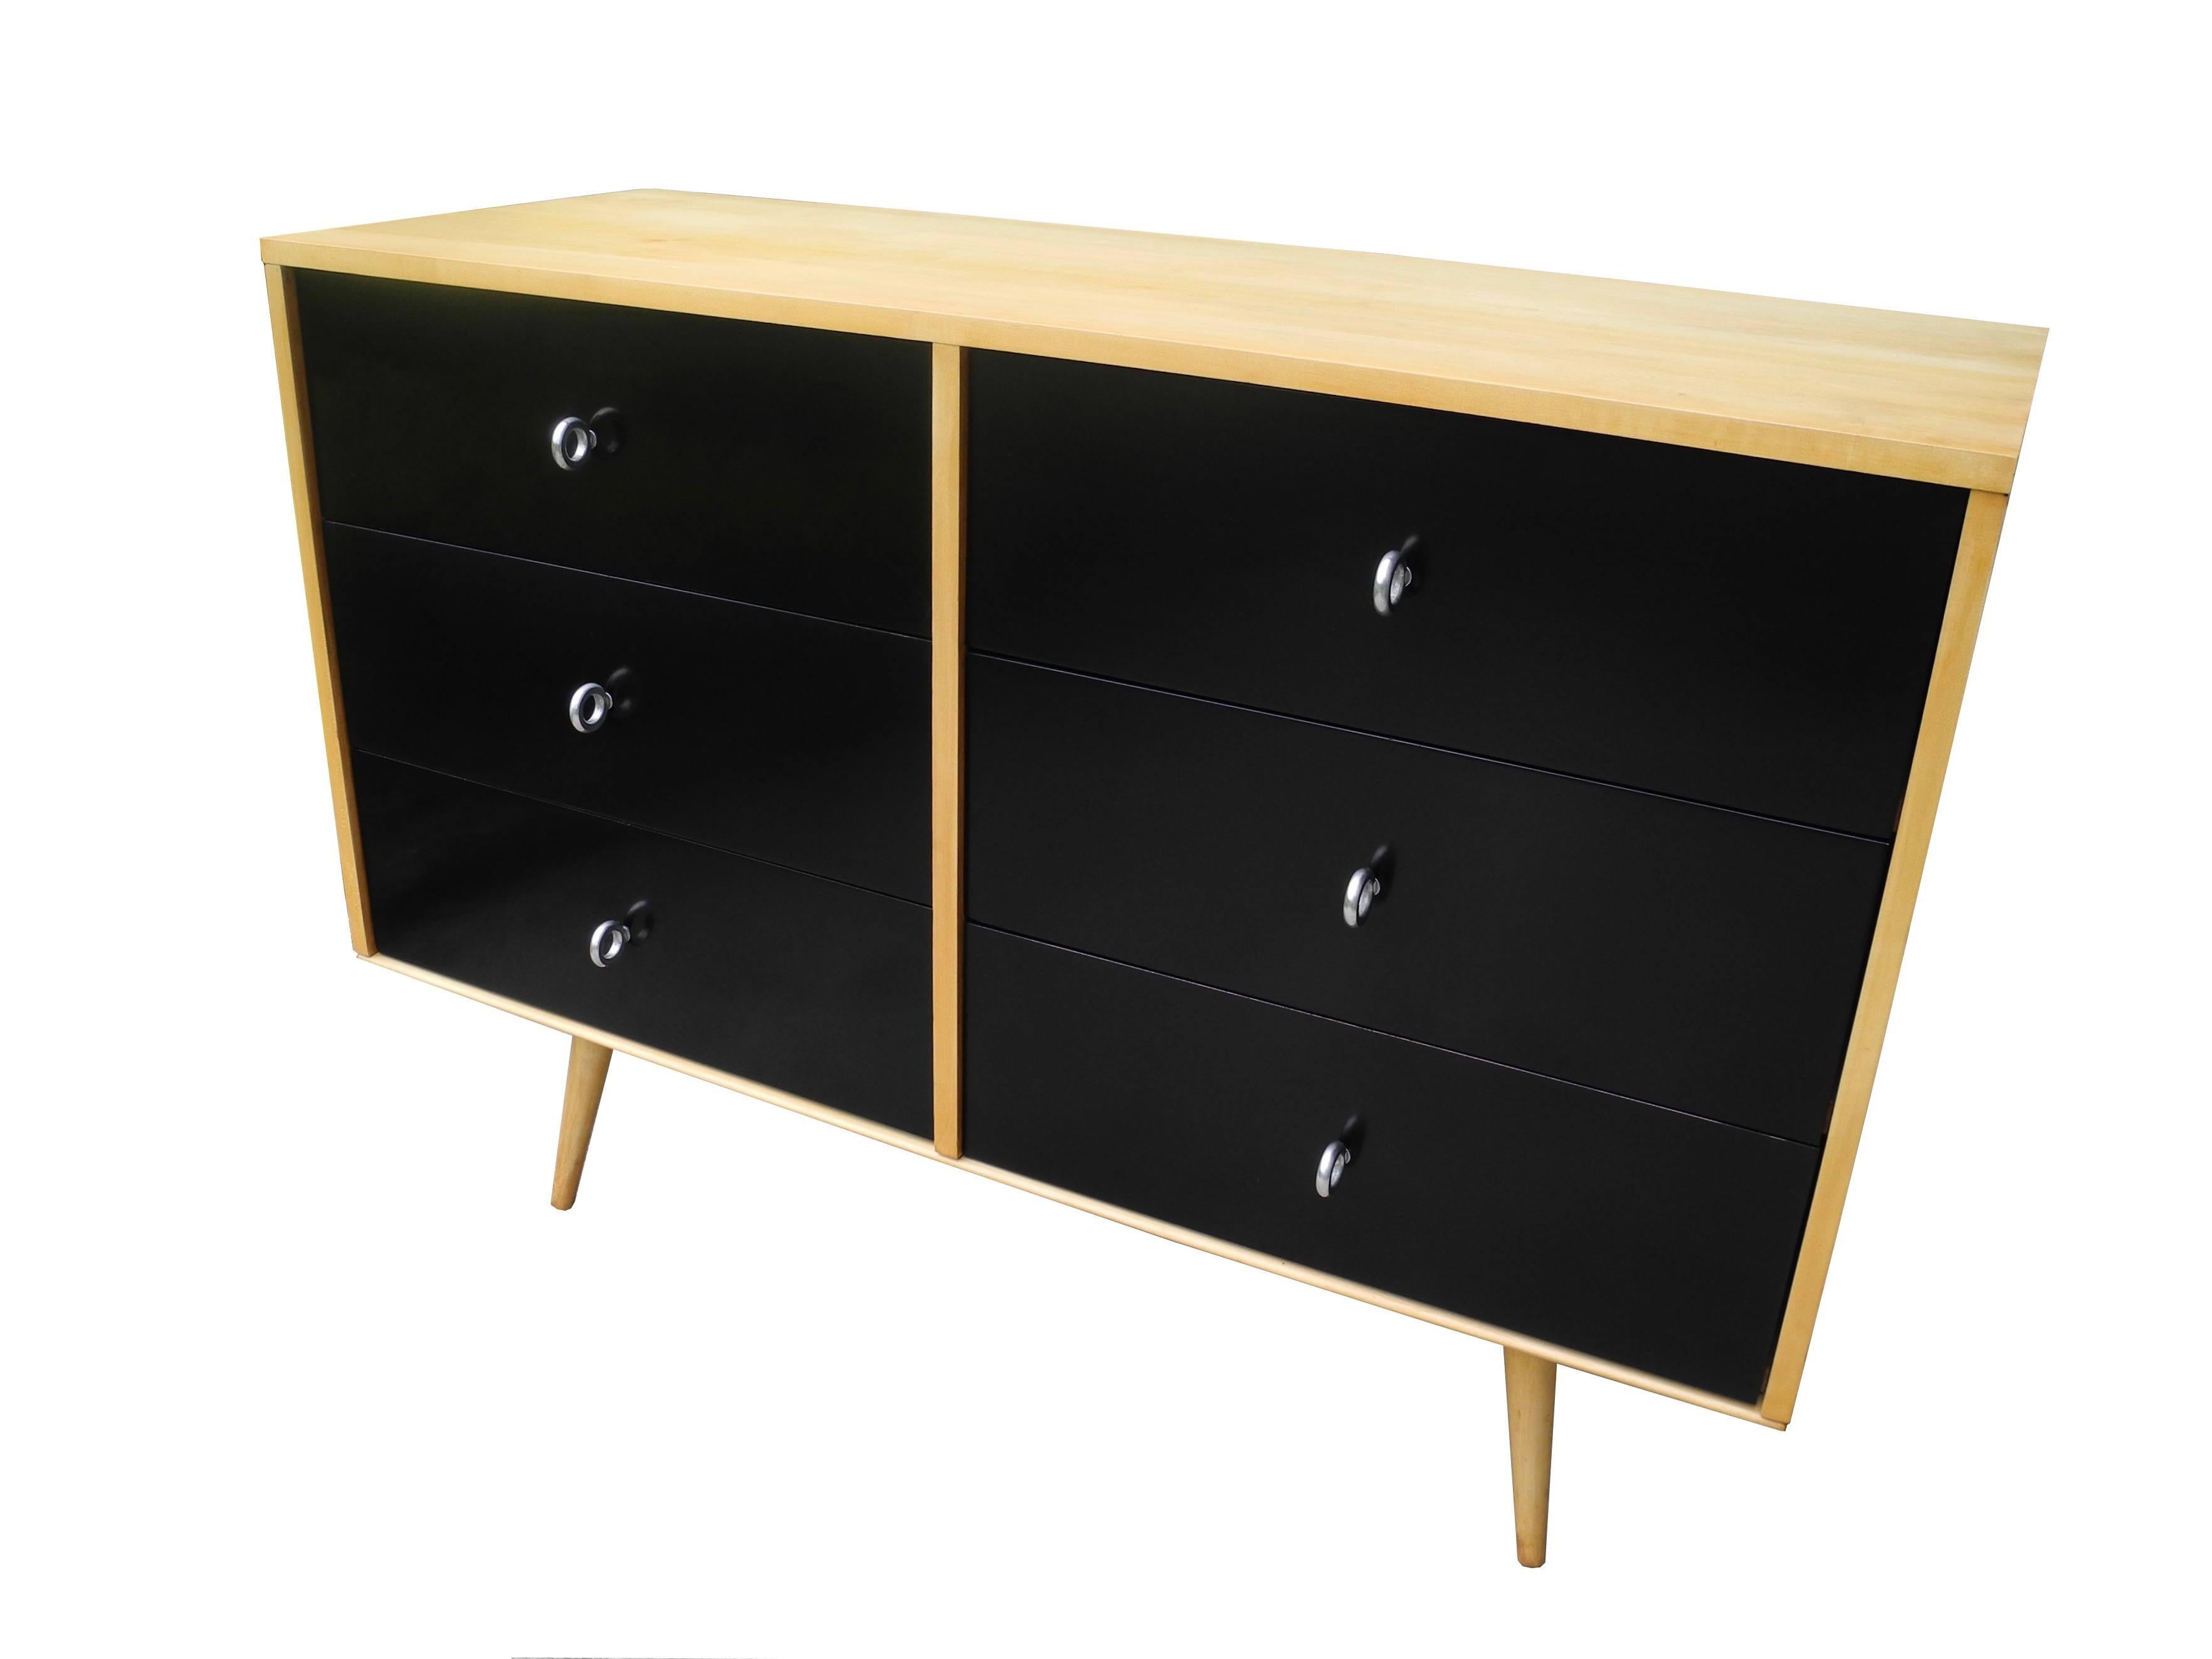 This Paul McCobb dresser has six drawers with original ring pulls. The solid maple case sits on top of a solid maple bench. Part of McCobb's modular designs. The drawer fronts are painted and polished black. The case and bench are natural maple.